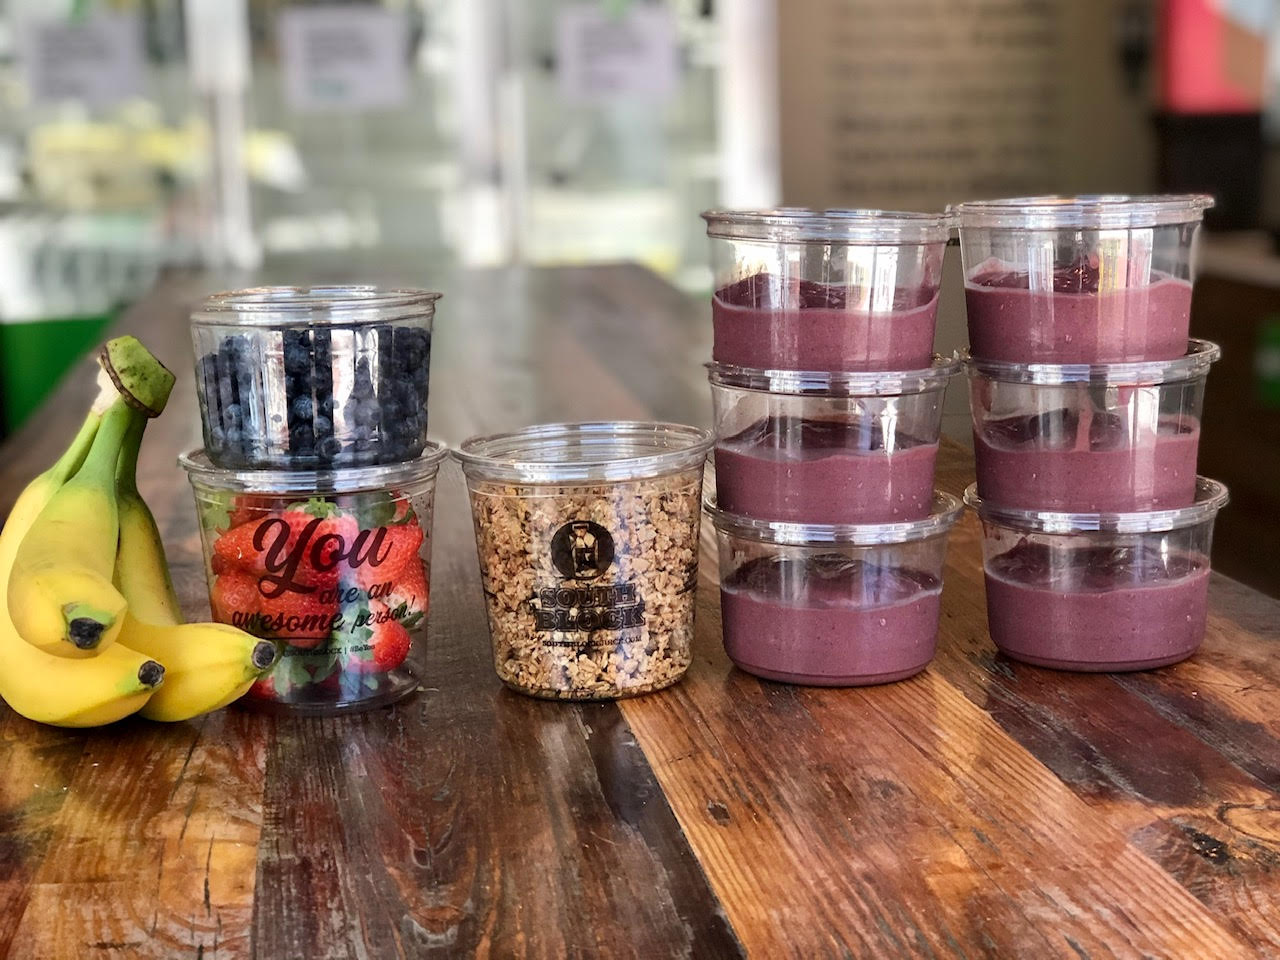 Takeout açaí kits have been a big seller for South Block during the coronavirus crisis